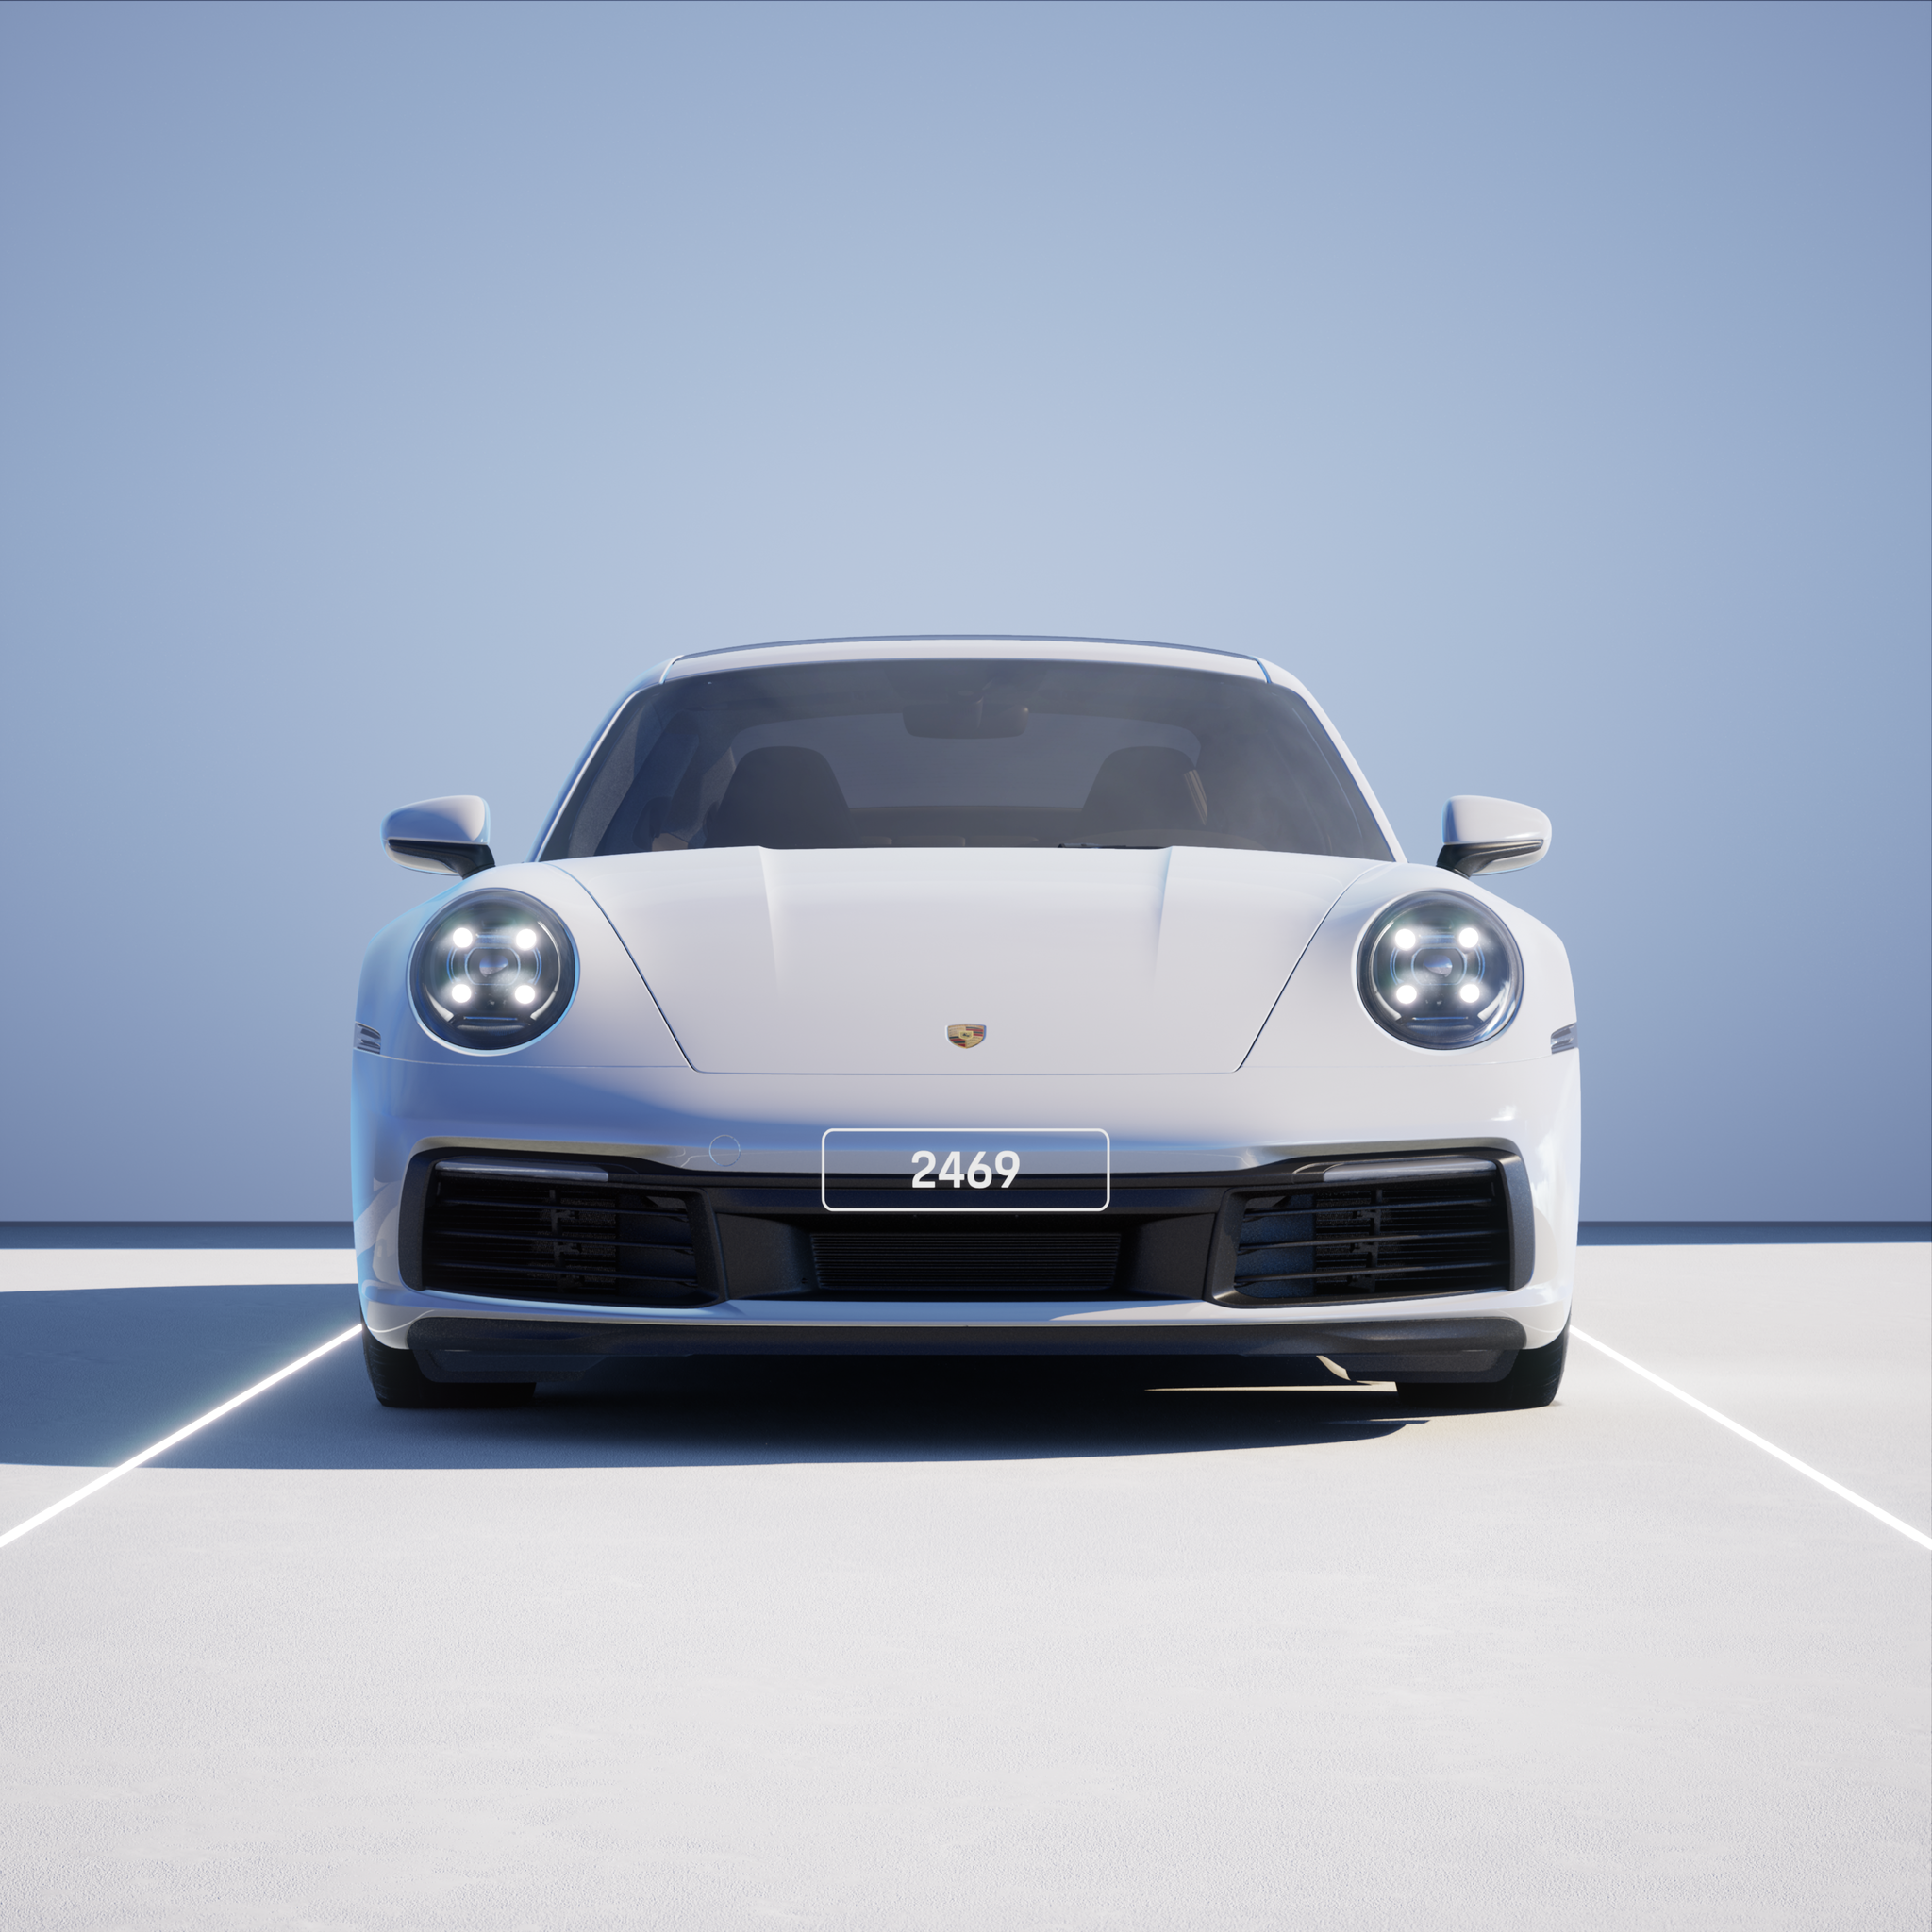 The PORSCHΞ 911 2469 image in phase